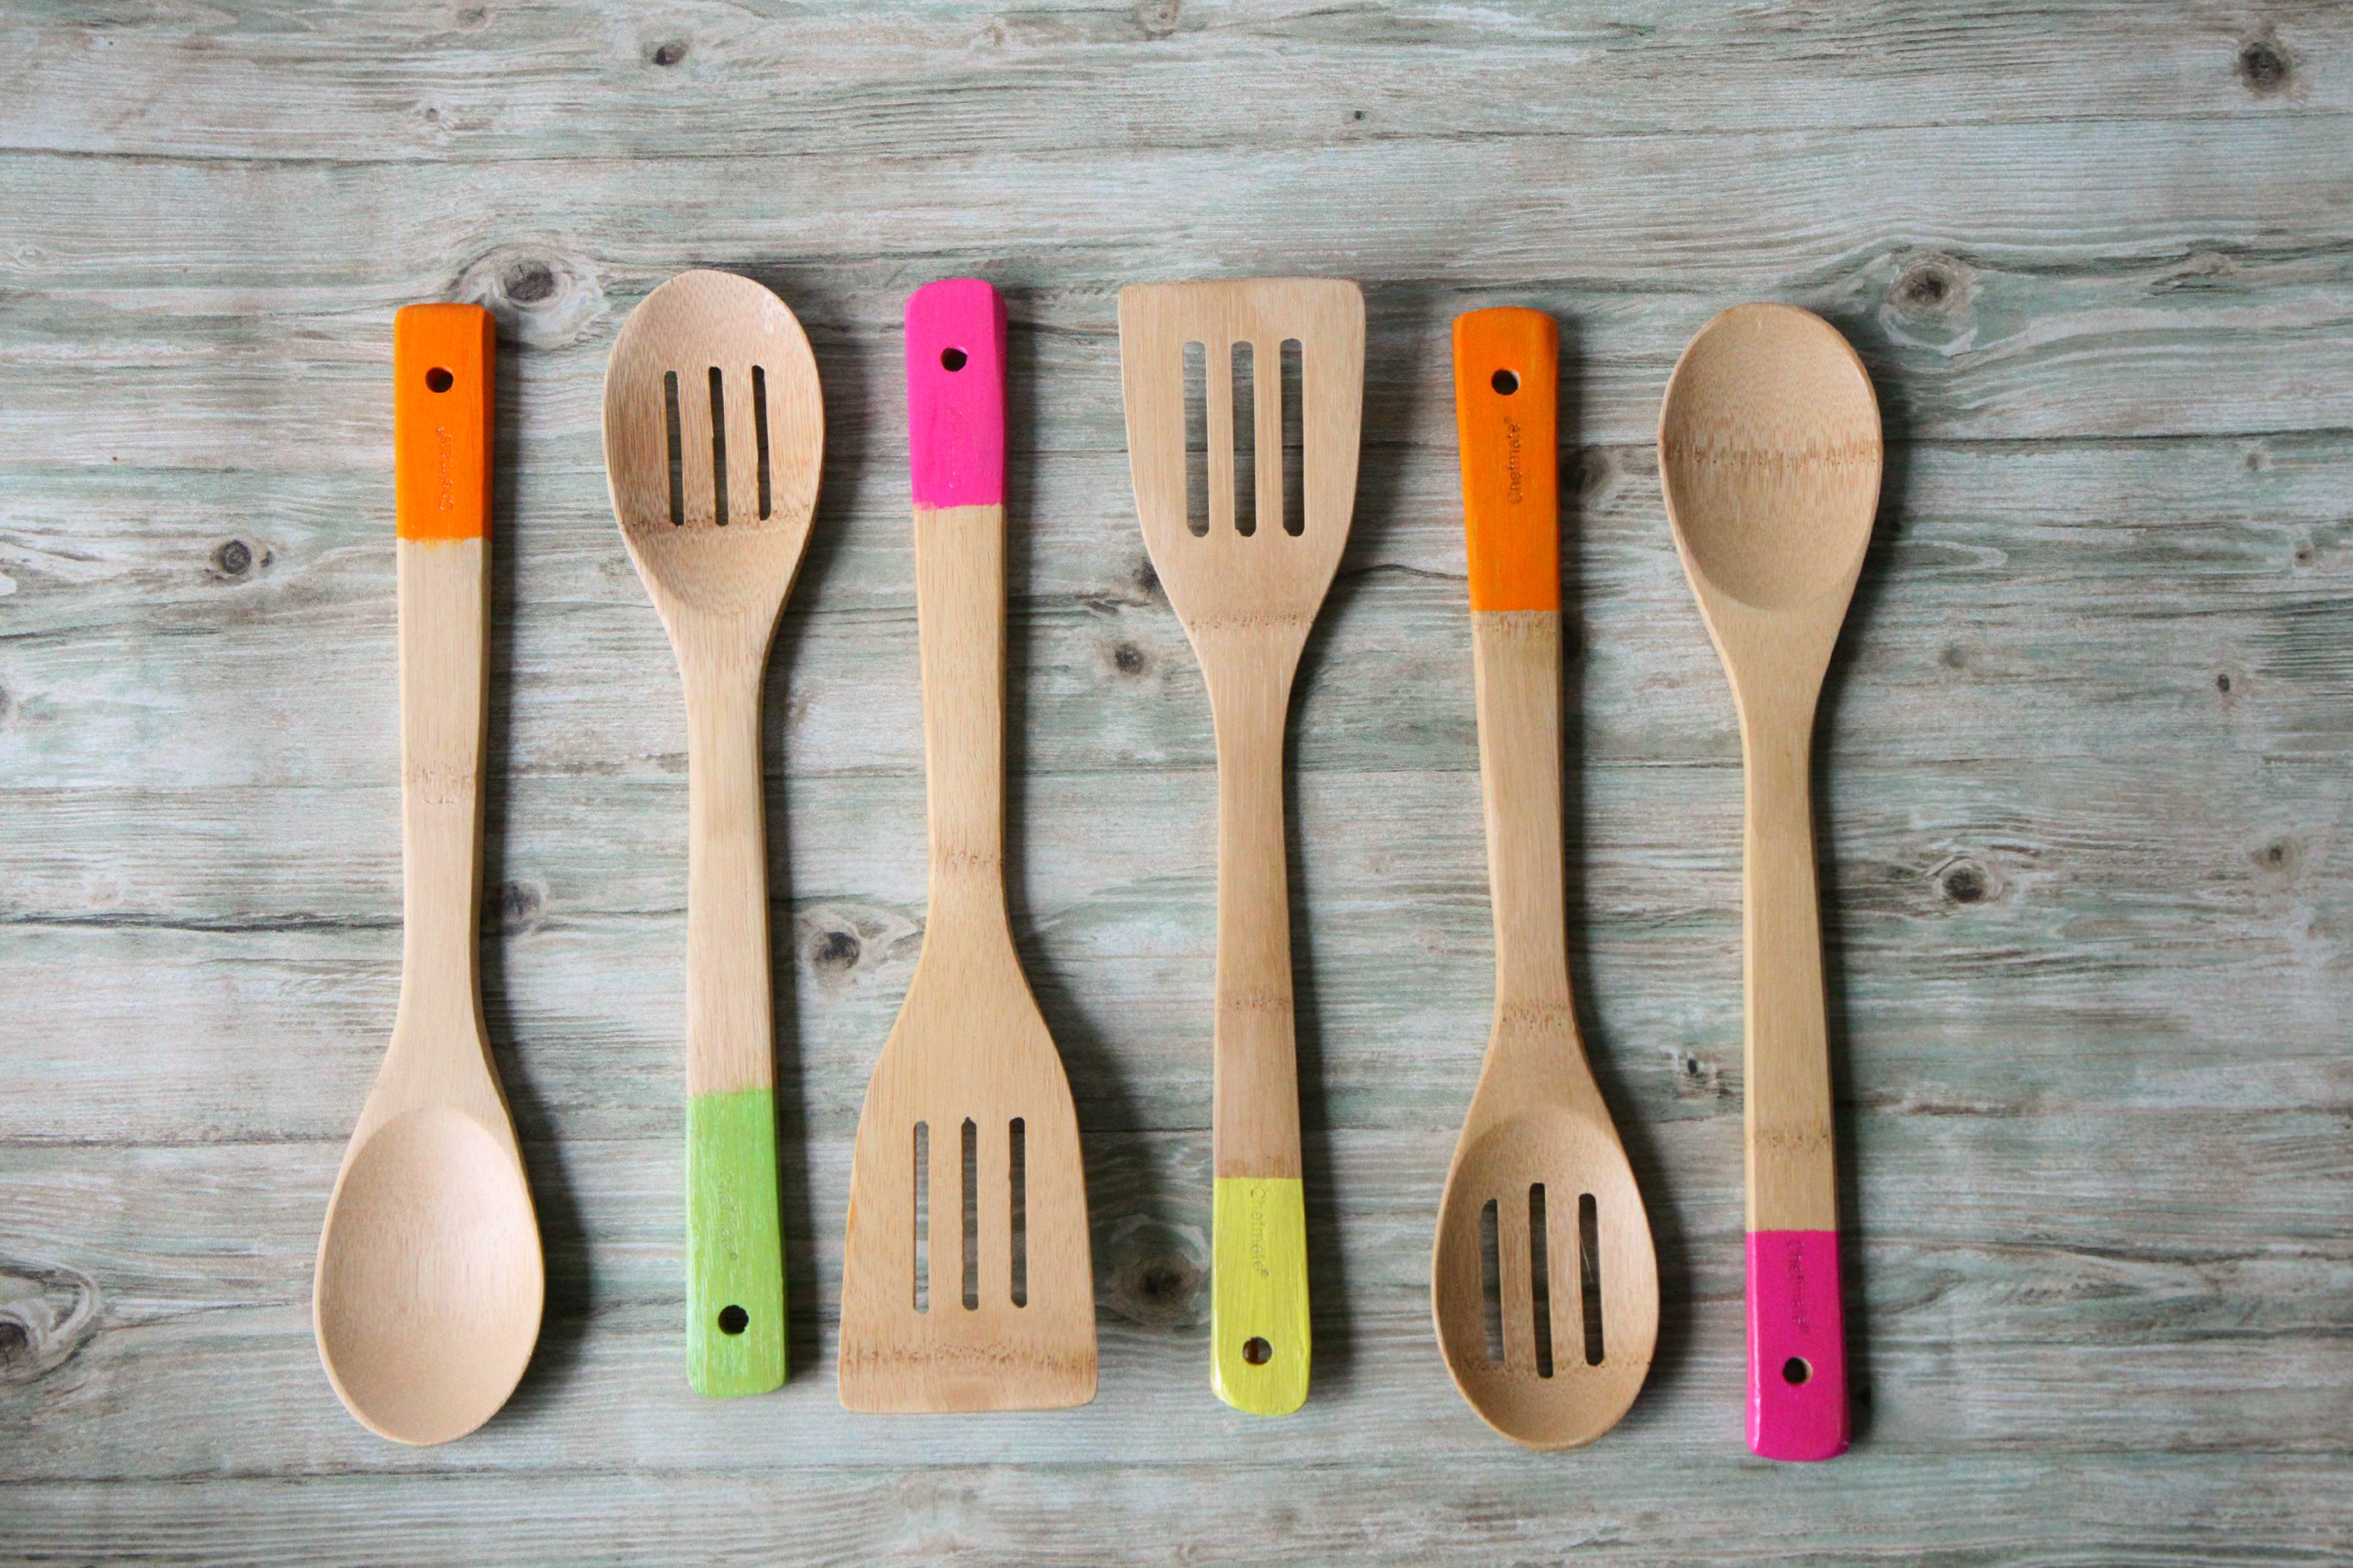 DIY Paint dipped spoons make a perfect hostess or Christmas gift!